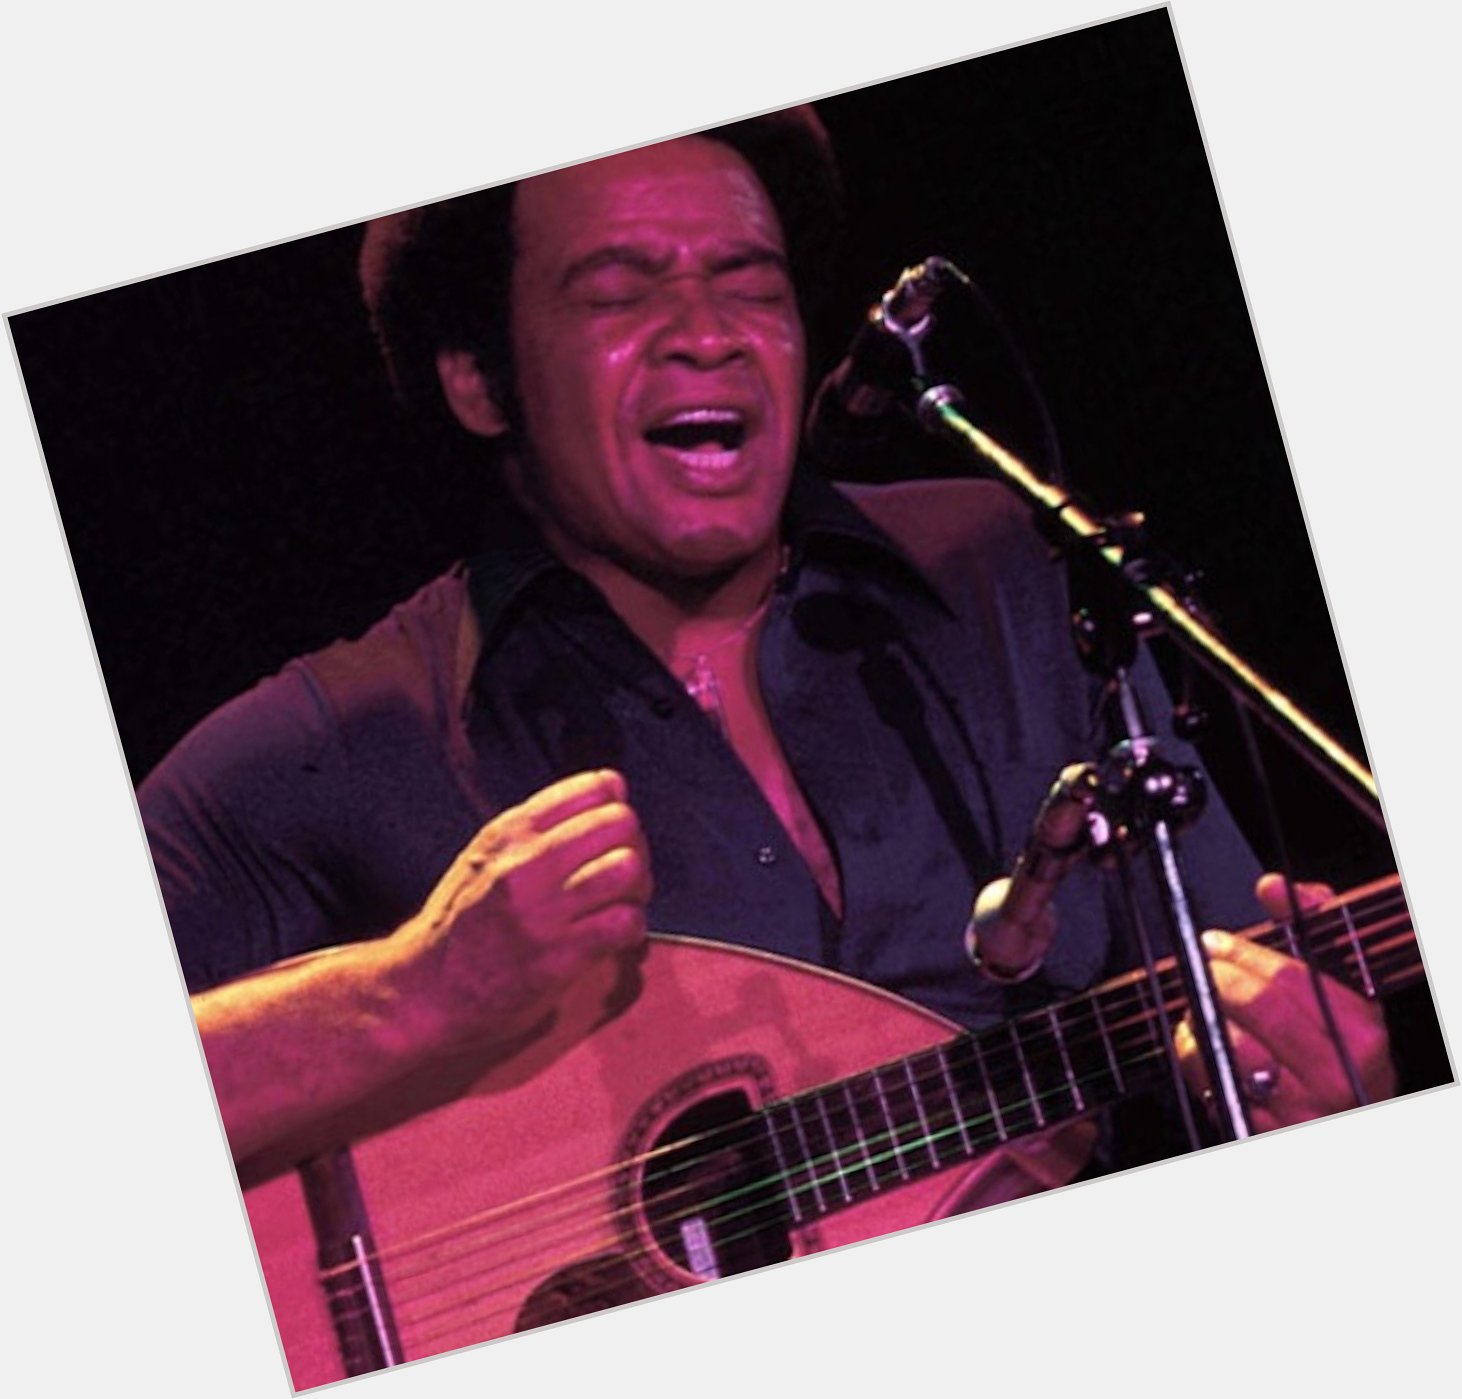 HAPPY BIRTHDAY BILL WITHERS BORN ON THIS DAY JULY 4, 